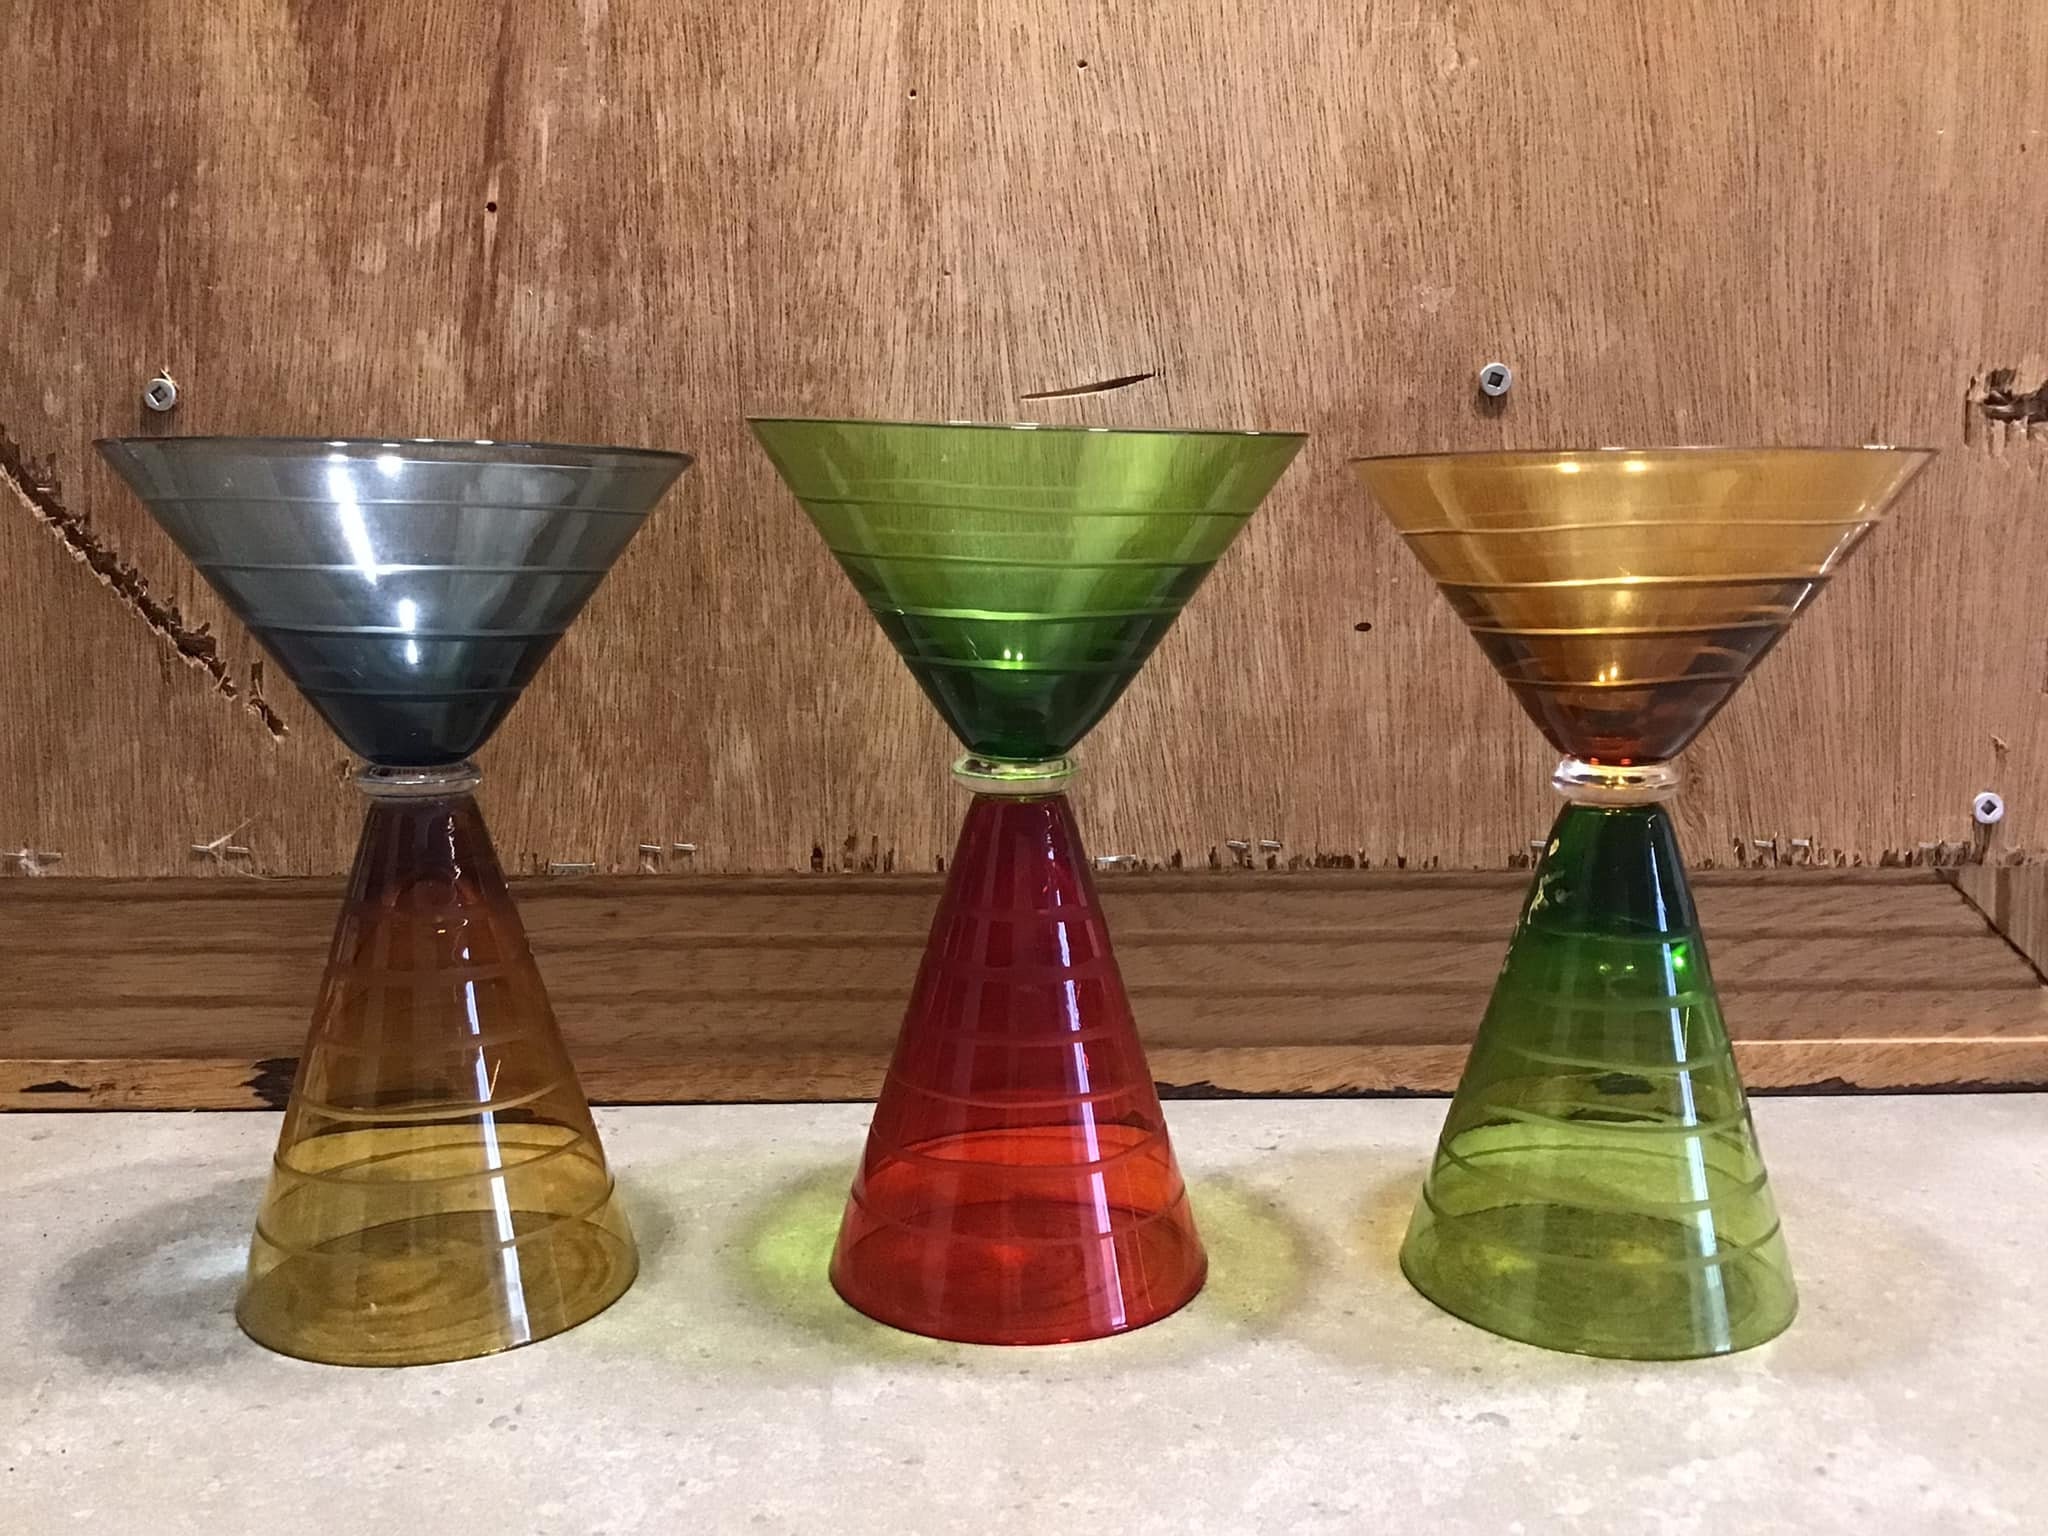 Unique Cocktail Glasses Set of 2 8-Ounce Double Sided Colorful Glass, Cute Cocktail Glassware Vintage Coupe Cups for Wine, Martini, Cordial